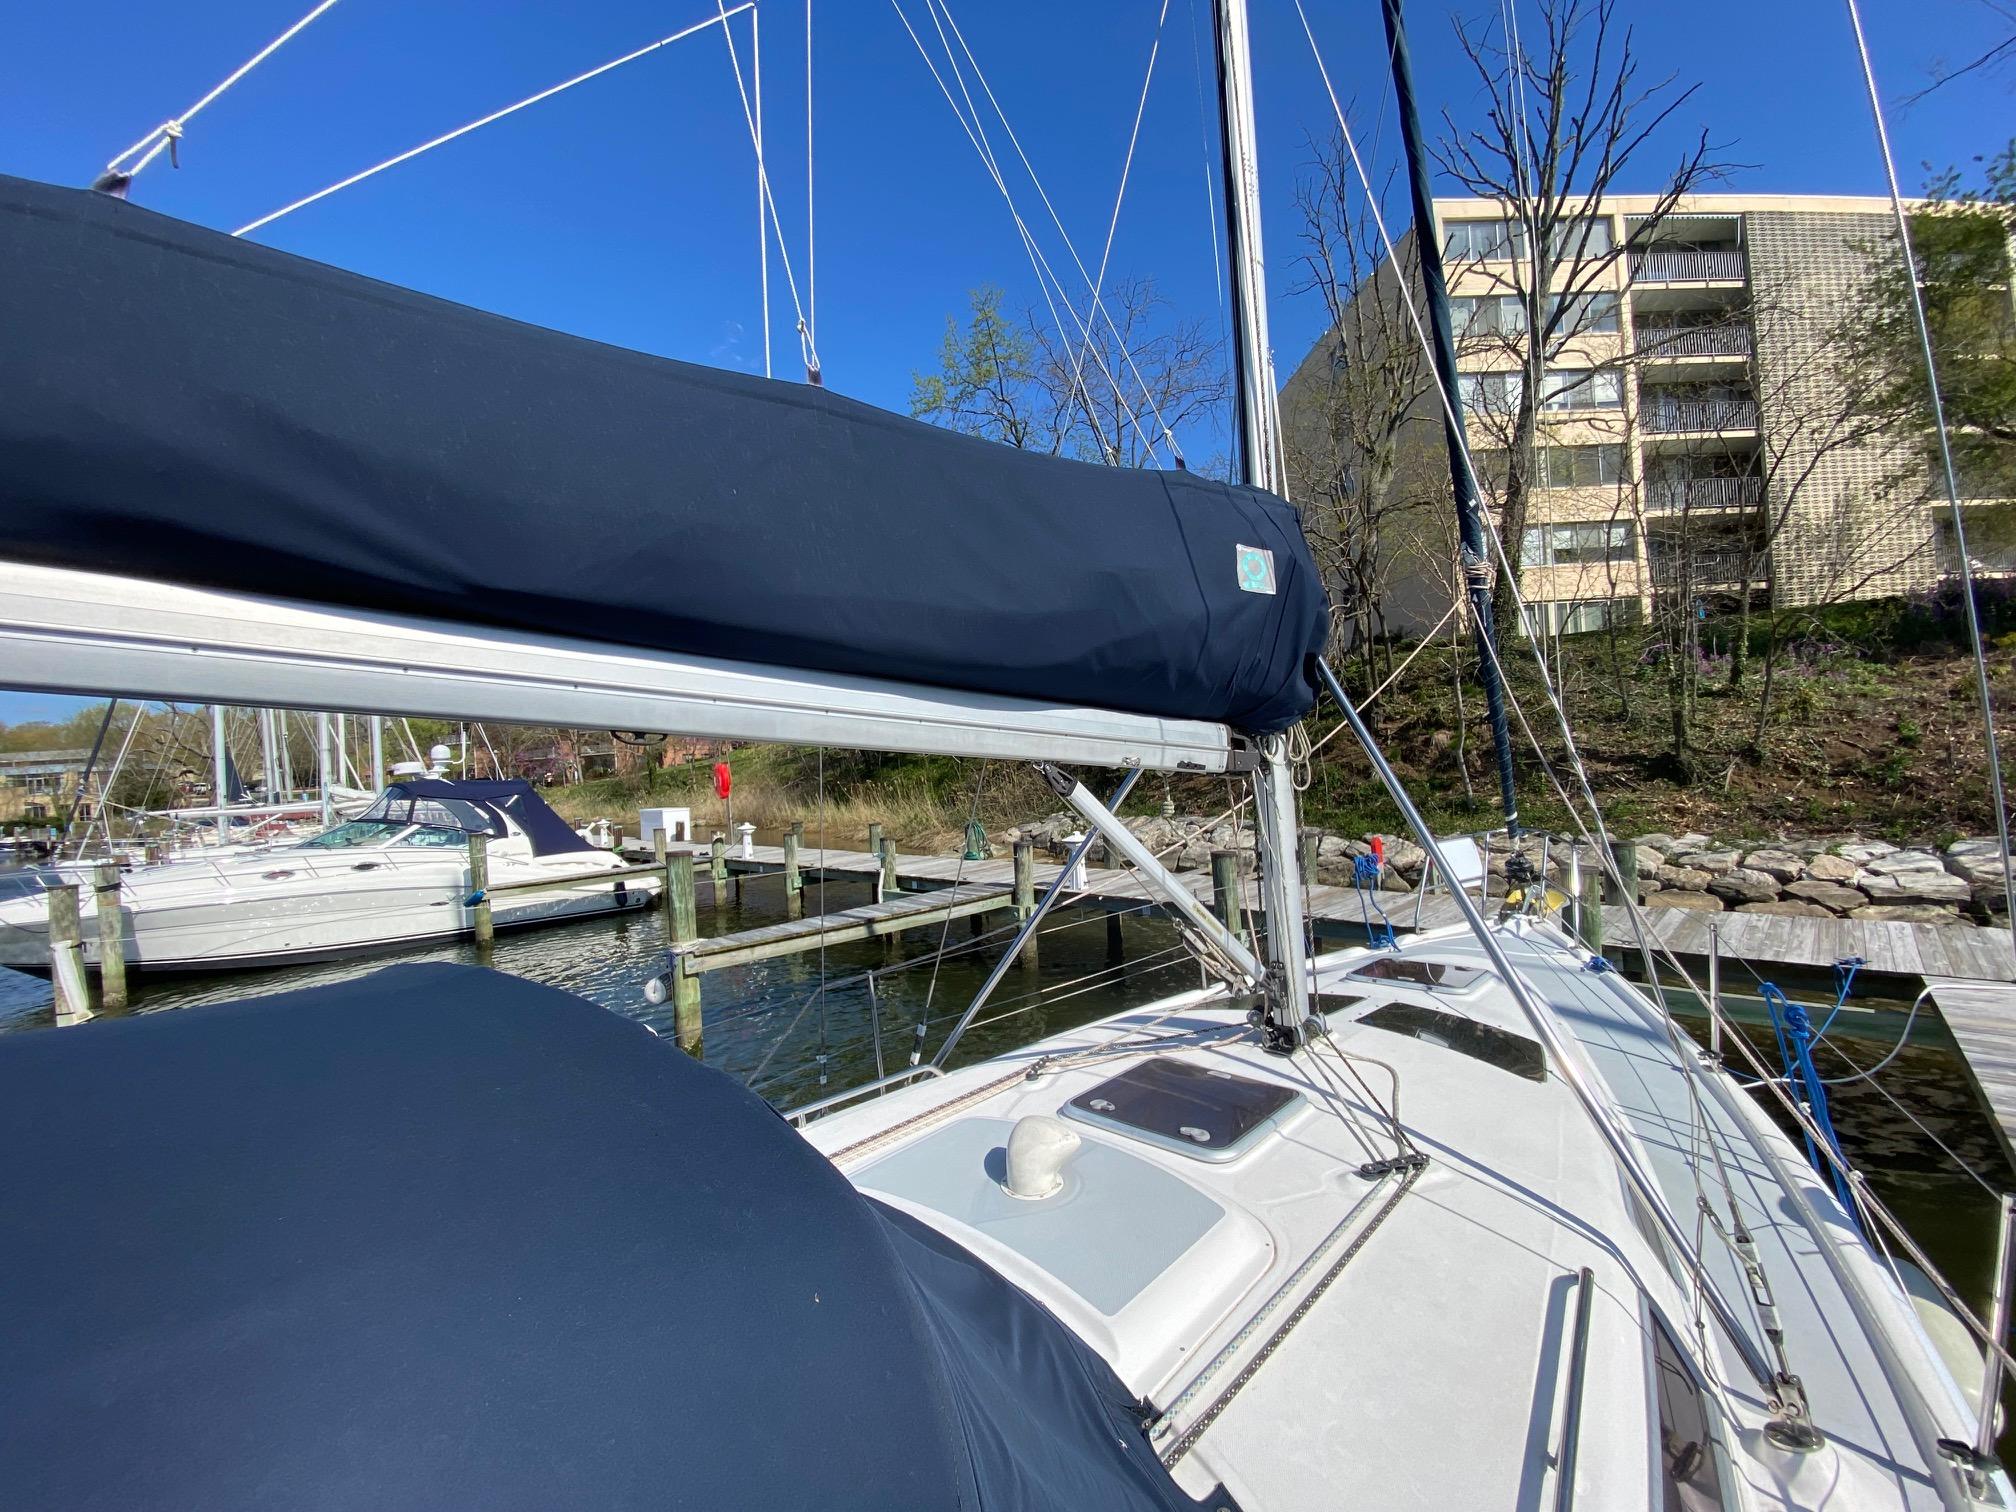 Rascal Yacht Brokers of Annapolis